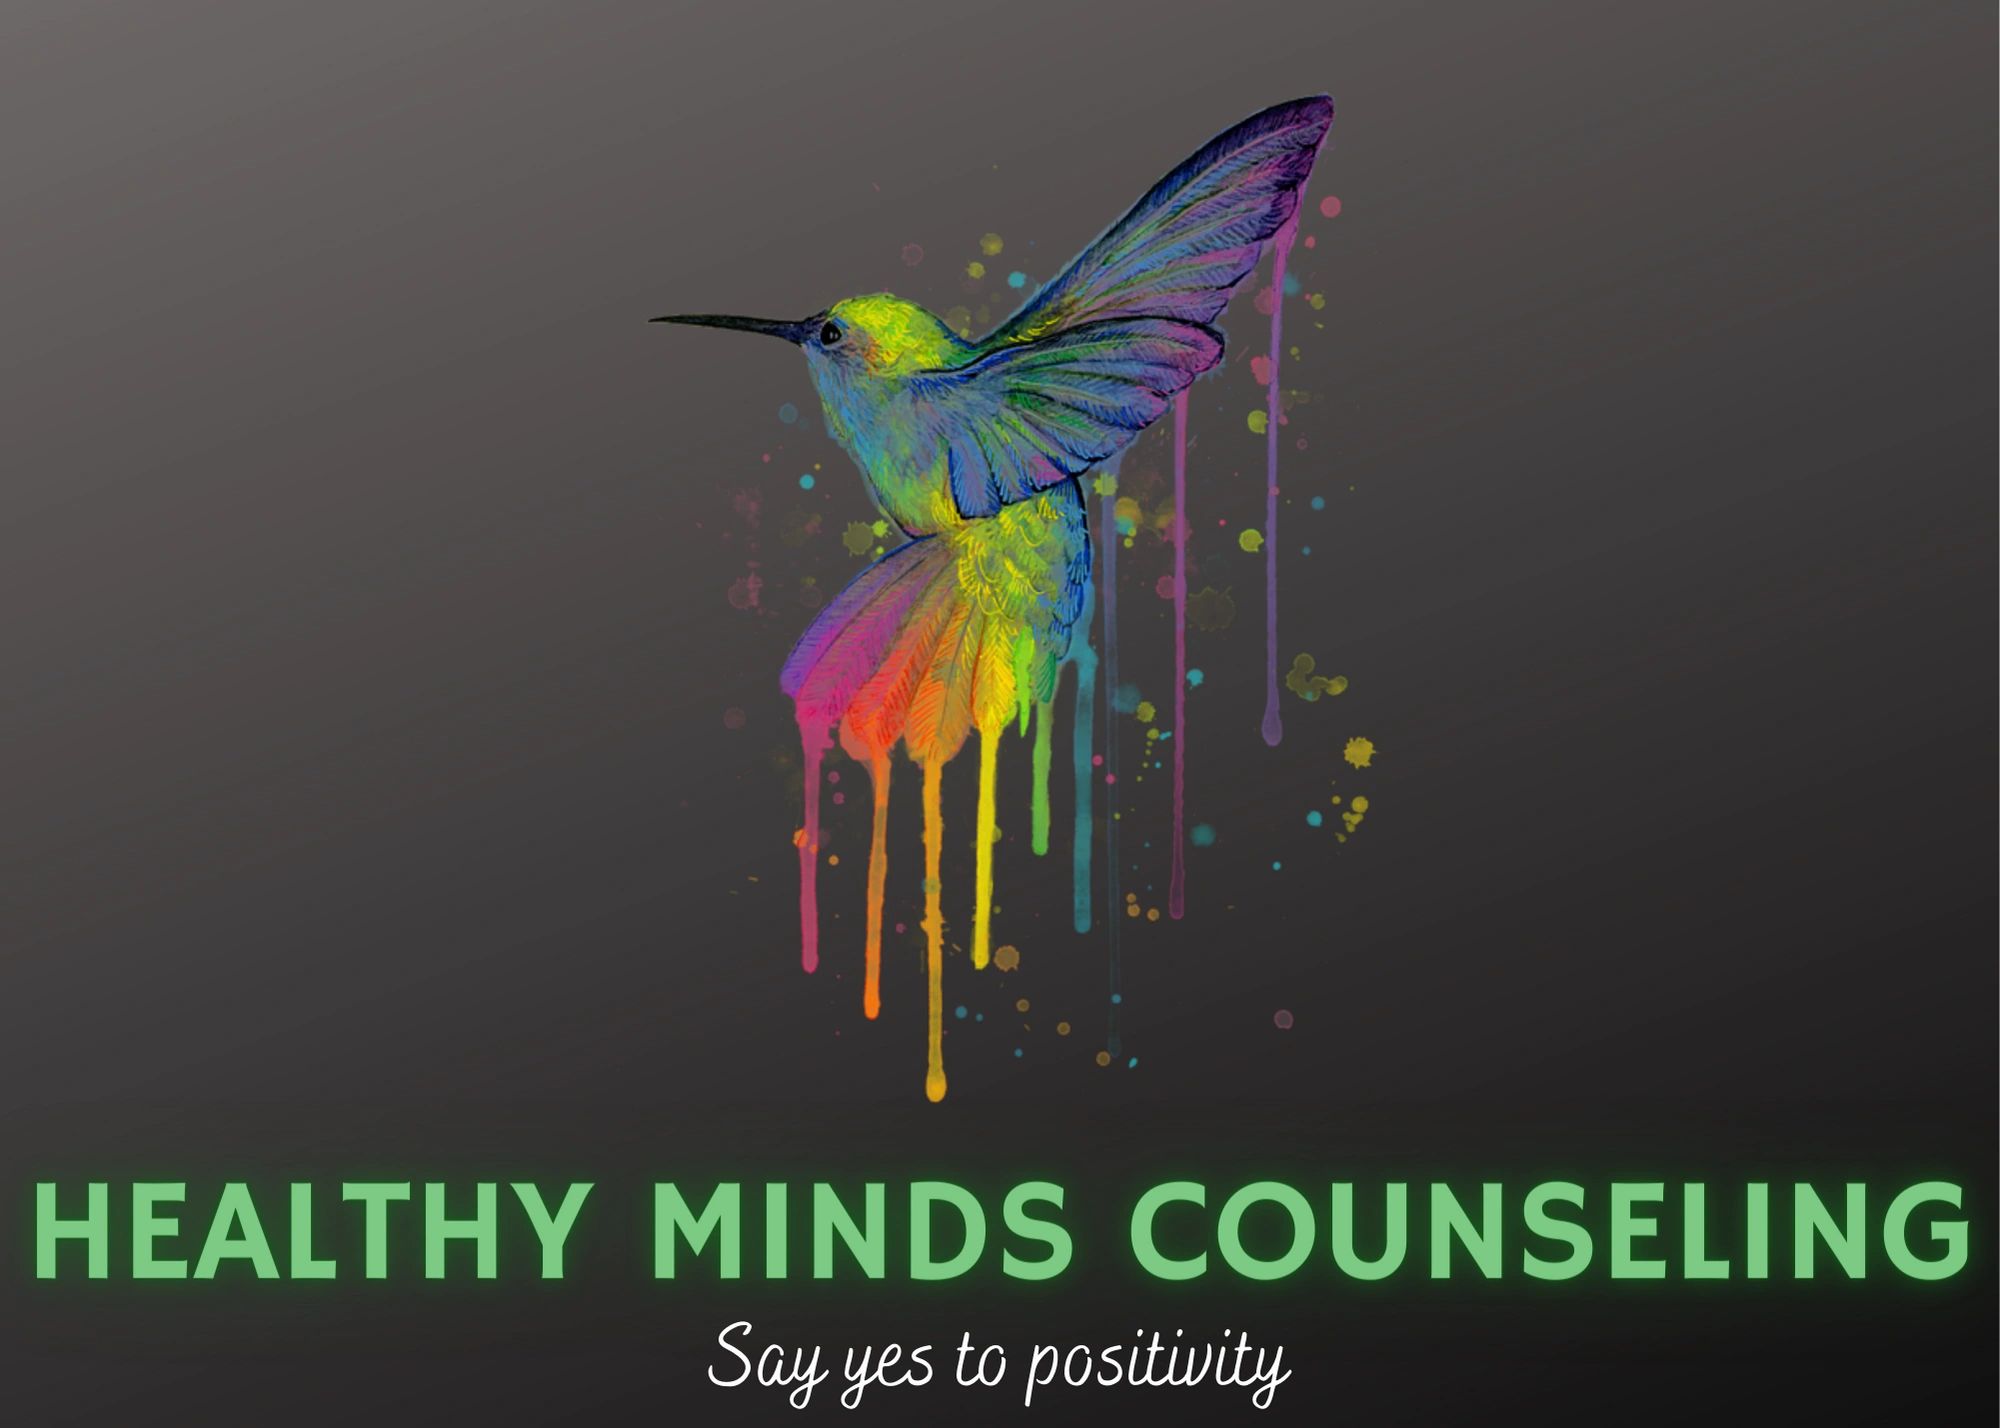 HEALTHY MINDS COUNSELING (1) 